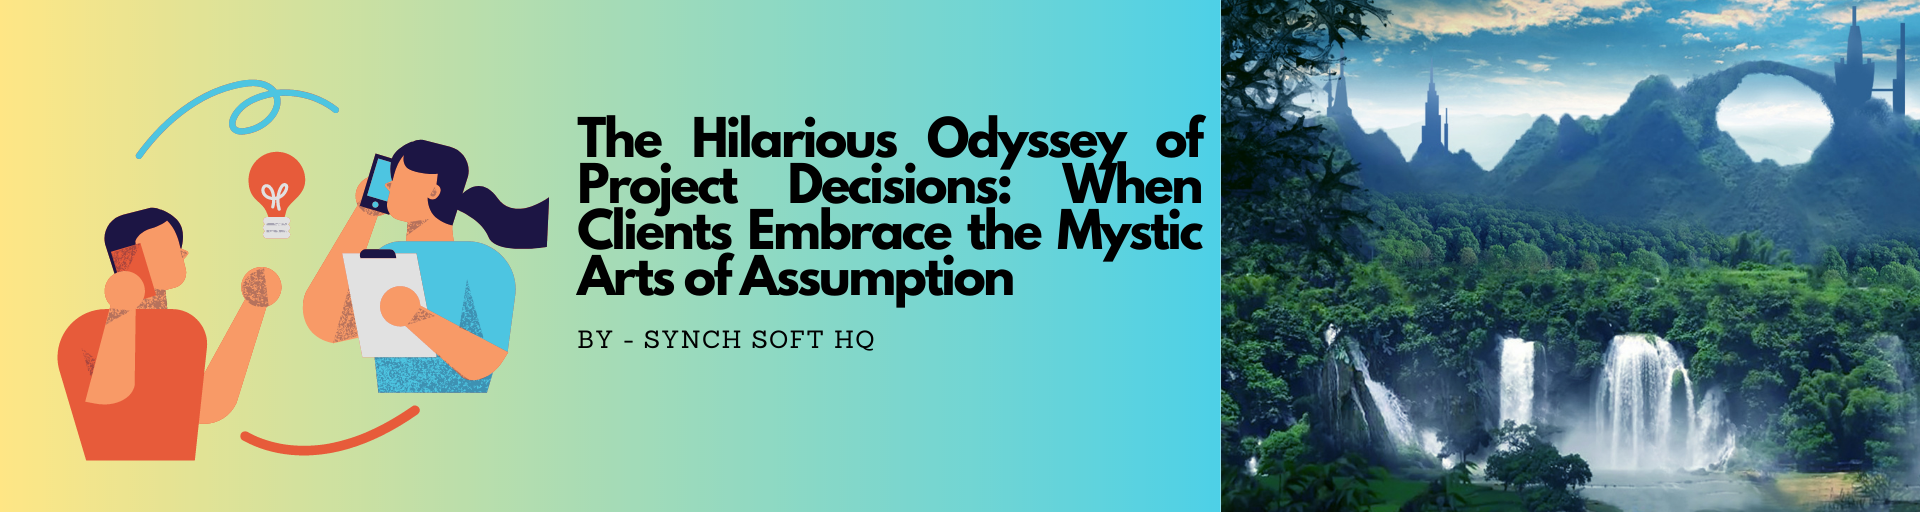 The Hilarious Odyssey of Project Decisions: When Clients Embrace the Mystic Arts of Assumption